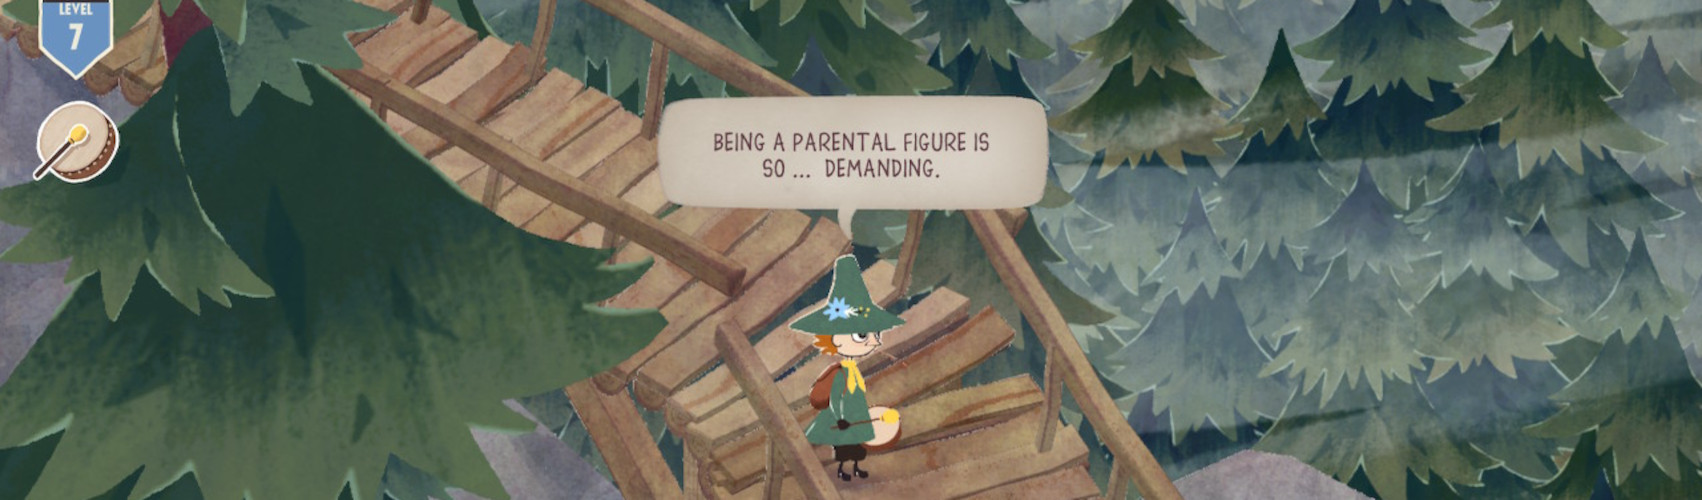 Snufkin standing amidst a great forest, says to himself, Being a parental figure is so demanding.